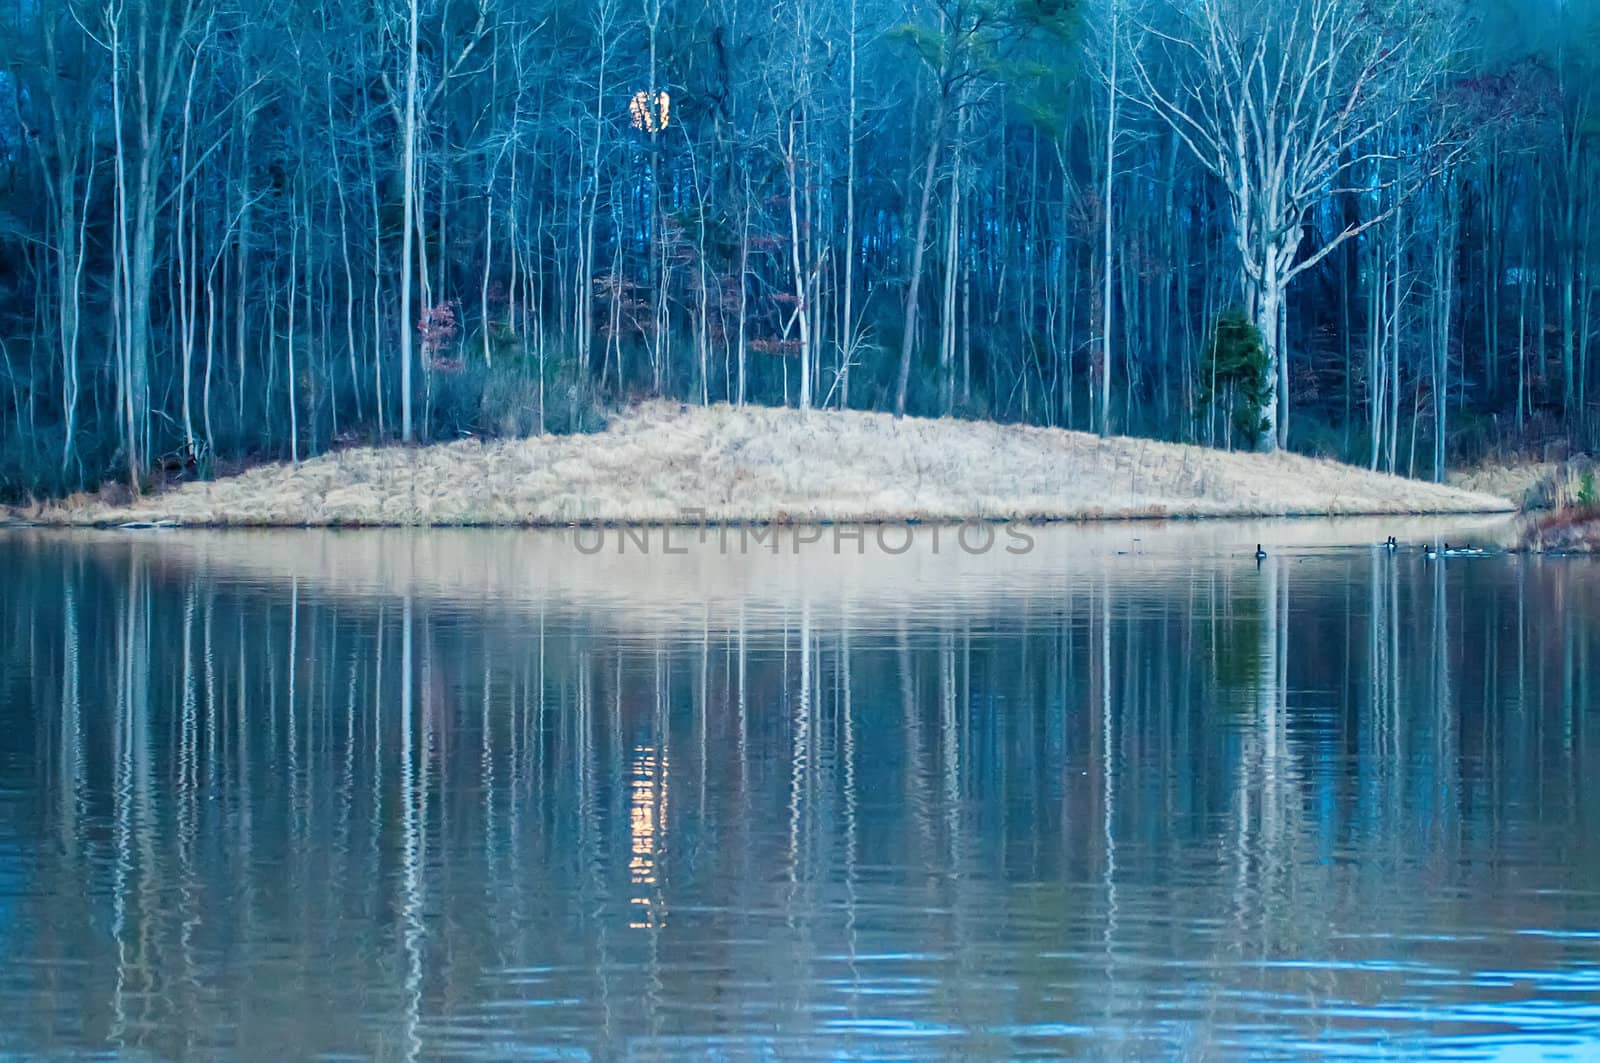 moon reflecting in lake by digidreamgrafix